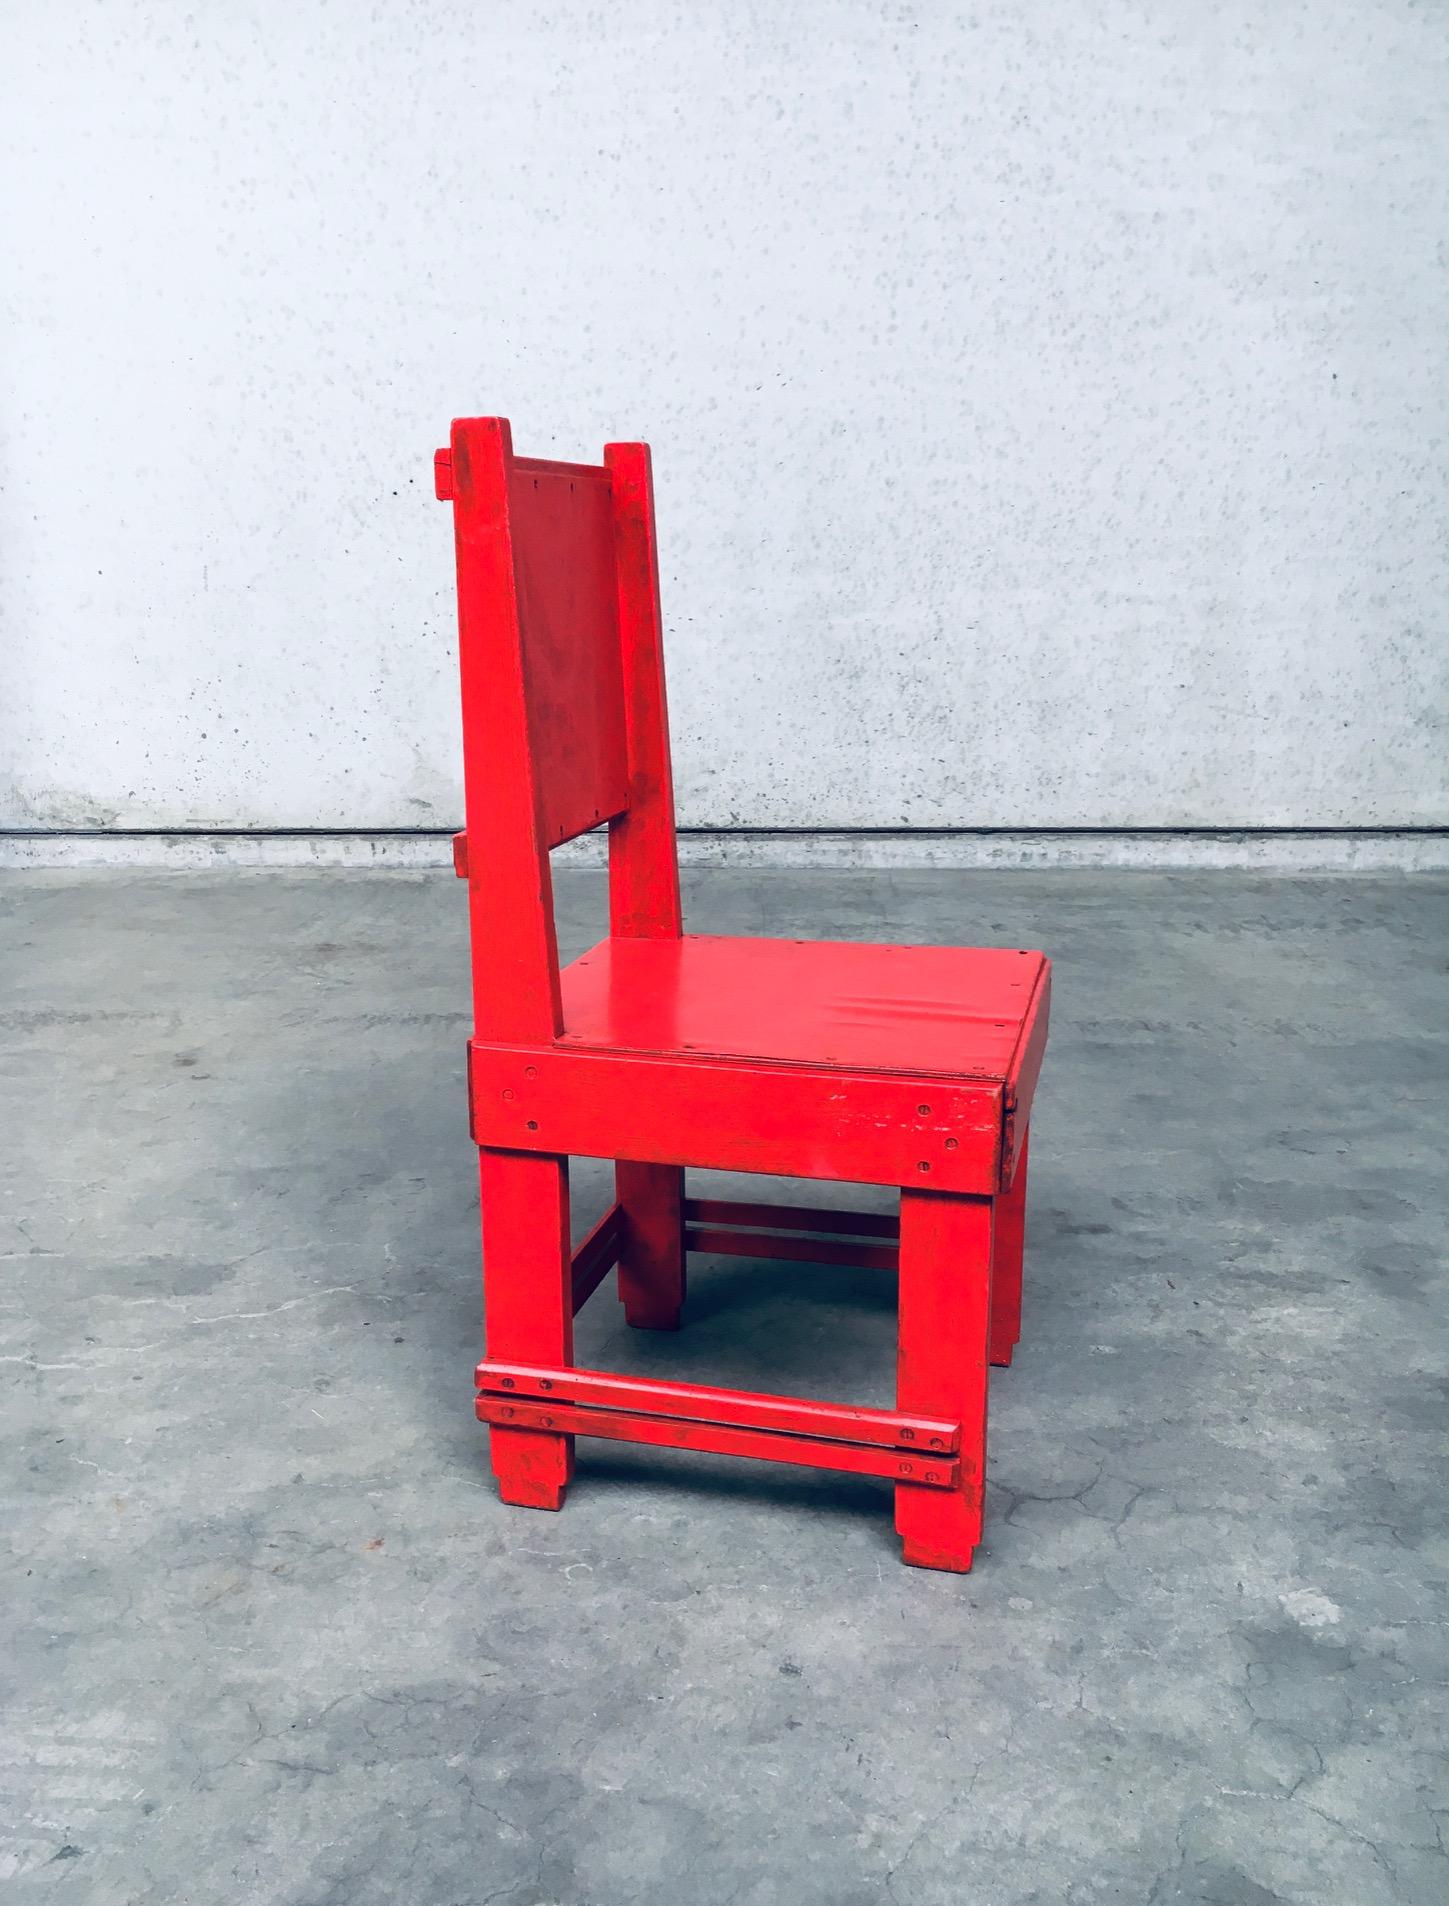 De Stijl Movement Design Red Chair Attributed to Jan Wils, 1920's Netherlands For Sale 2